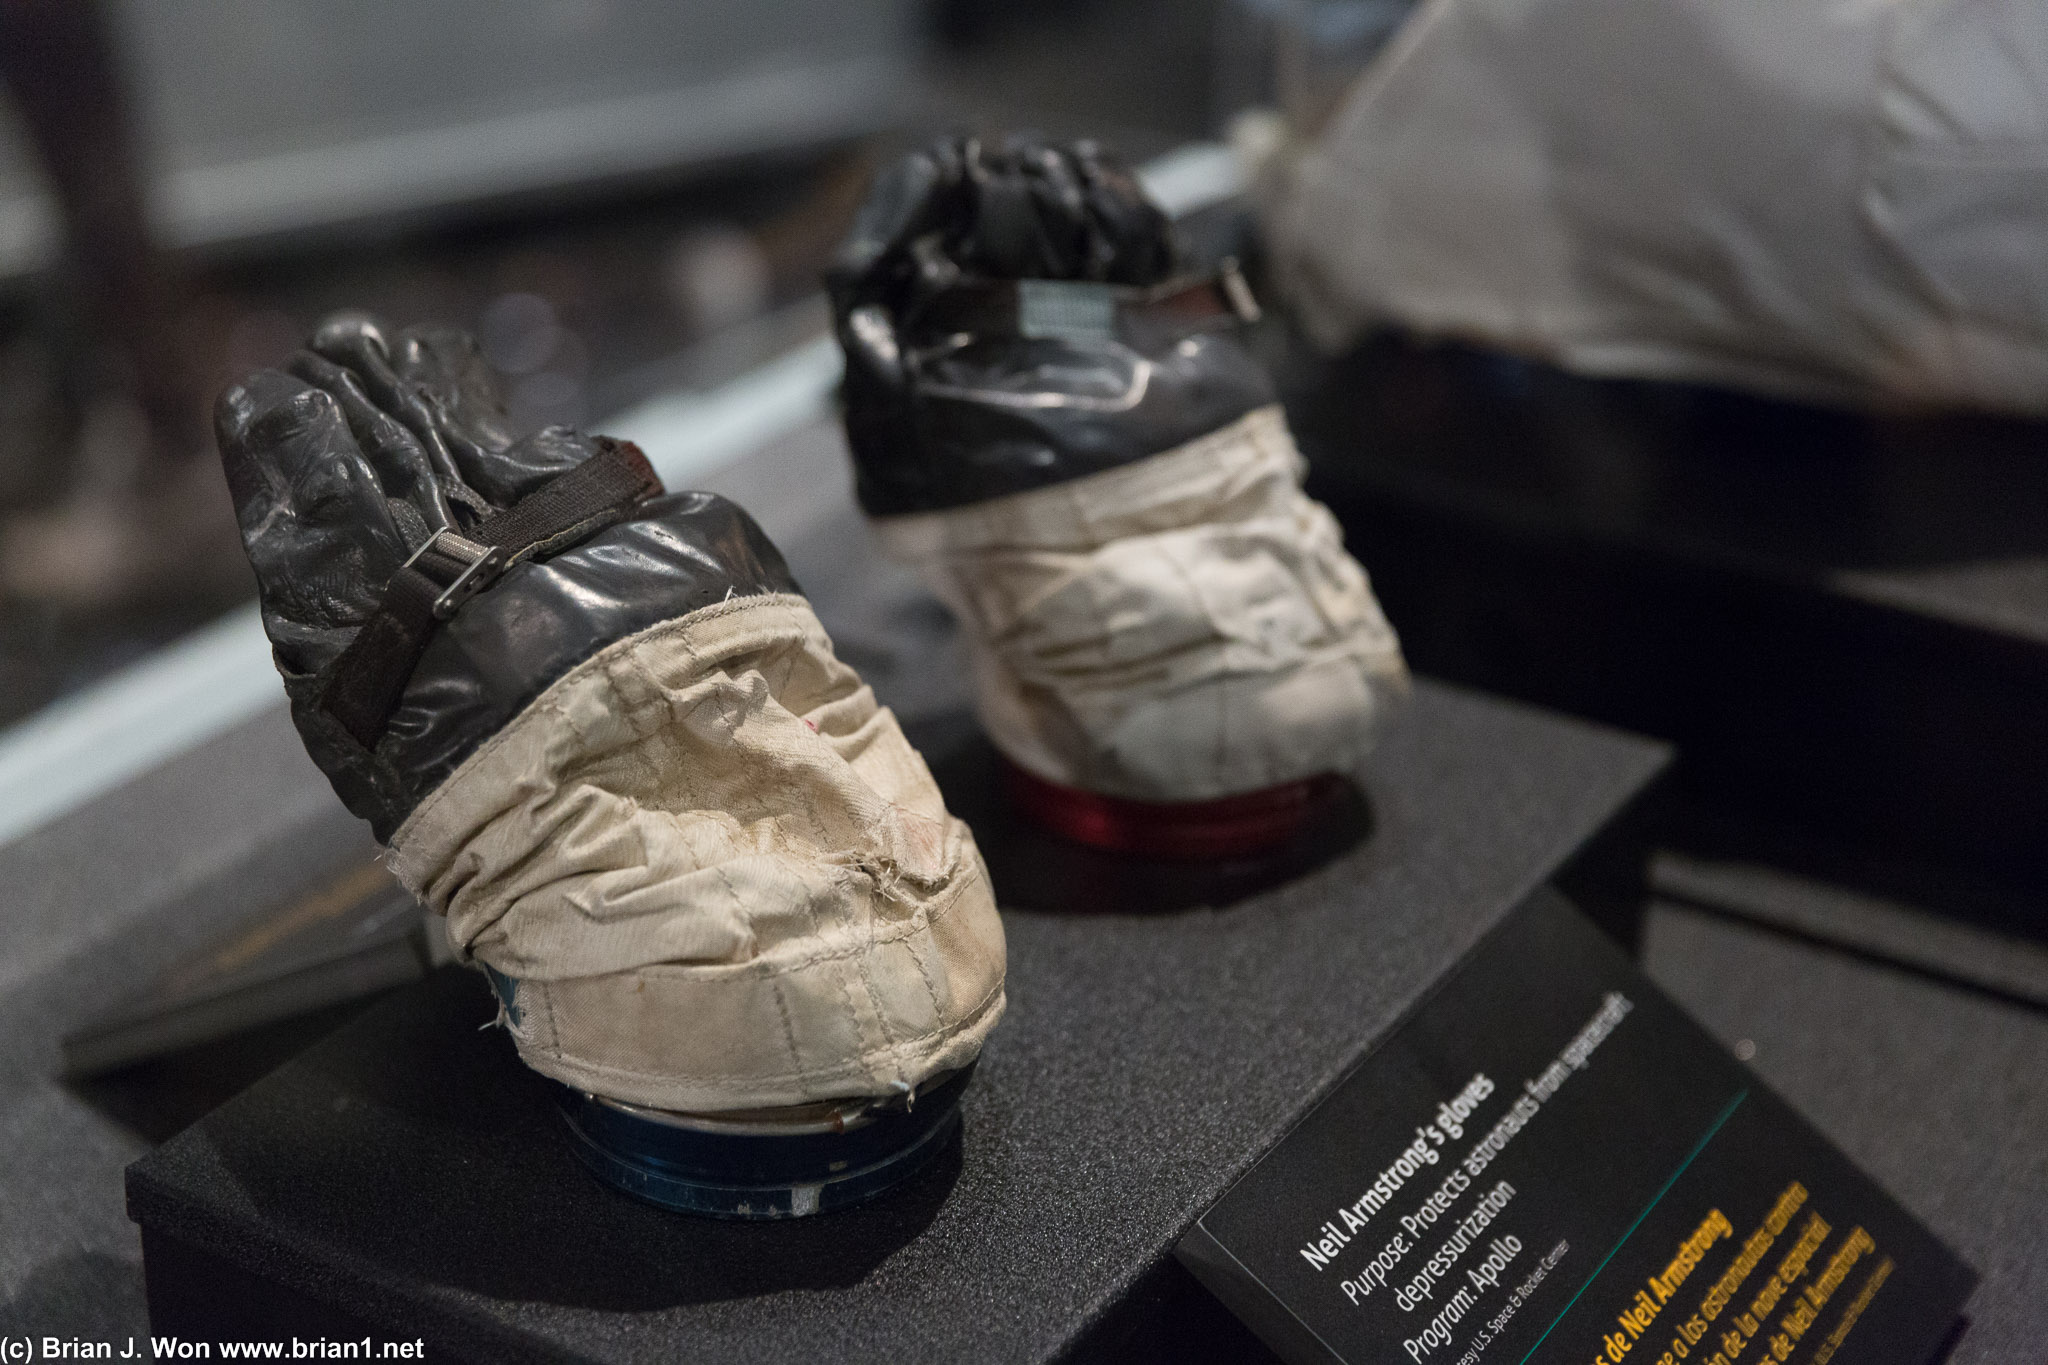 Neil Armstrong's gloves.